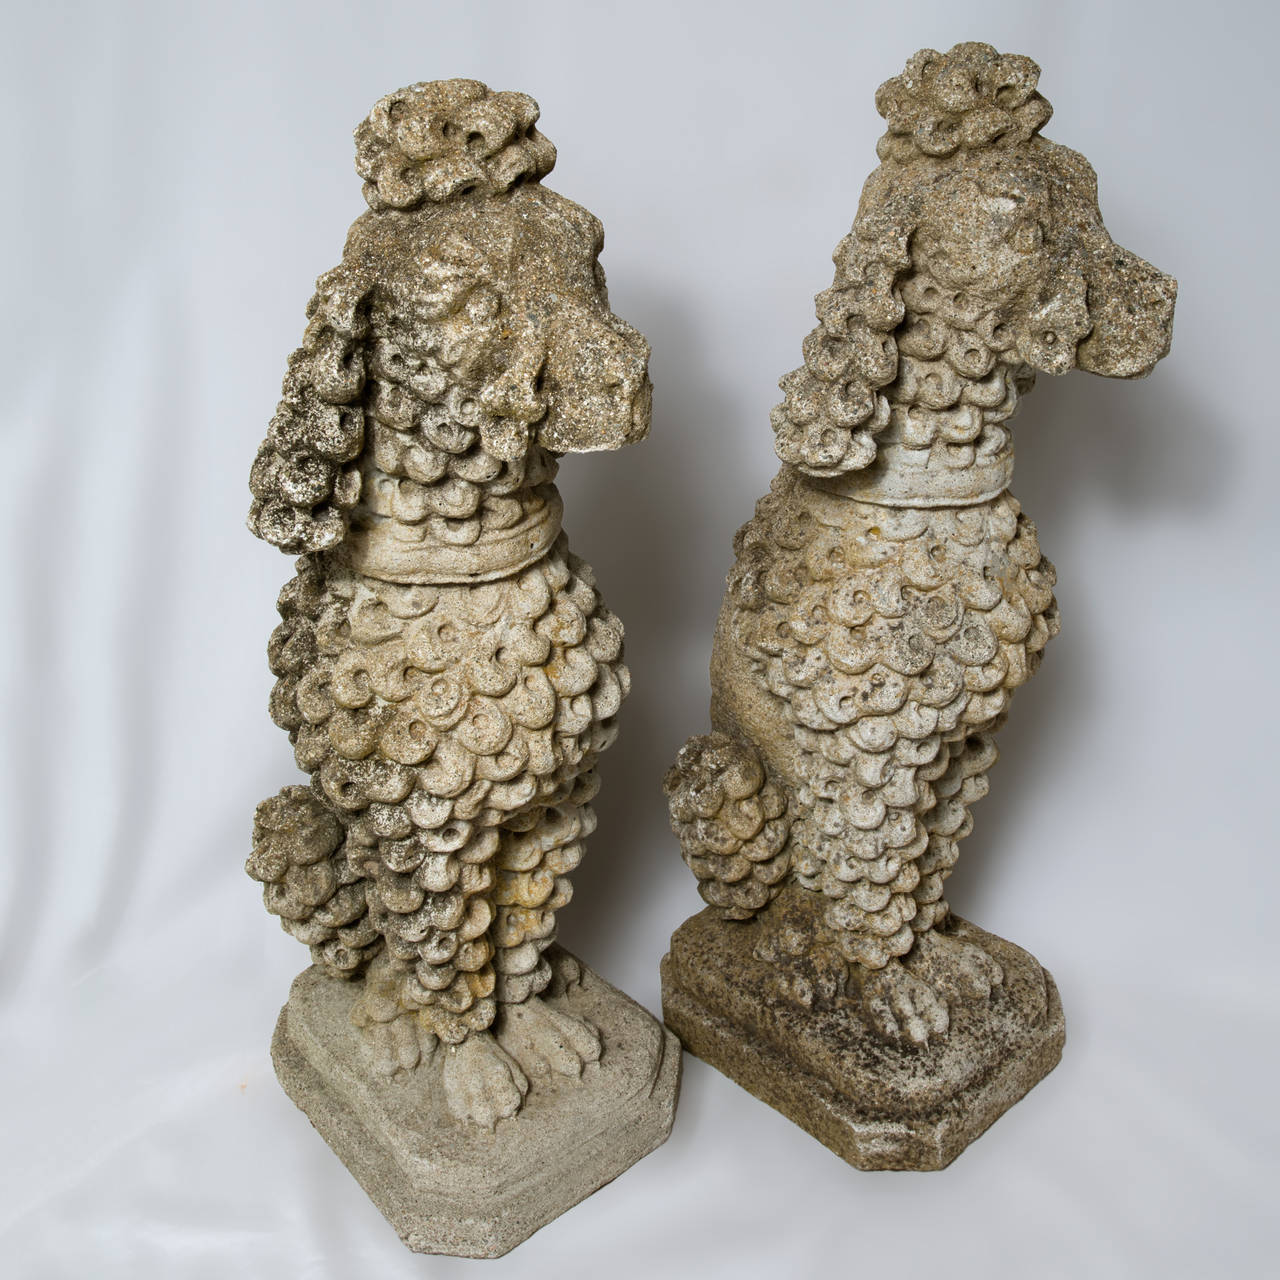 Vintage pair of whimsical entryway composition stone poodles with a great stylized form and weathered surface